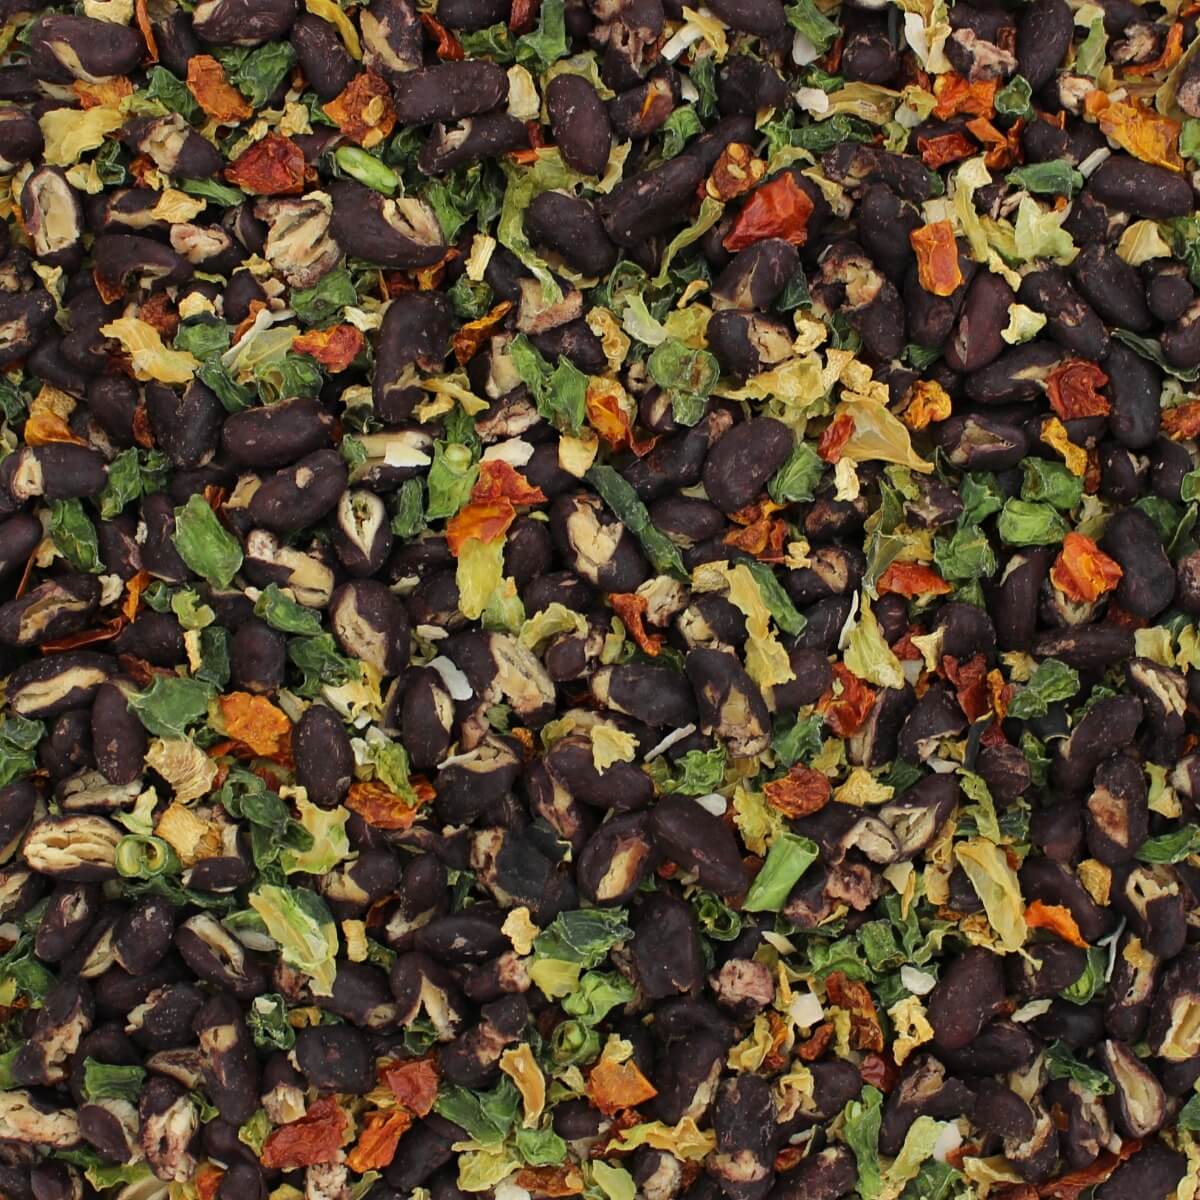 A close up of a pile of black beans and spices from the Harmony House Soup and Chili Mix Sampler.